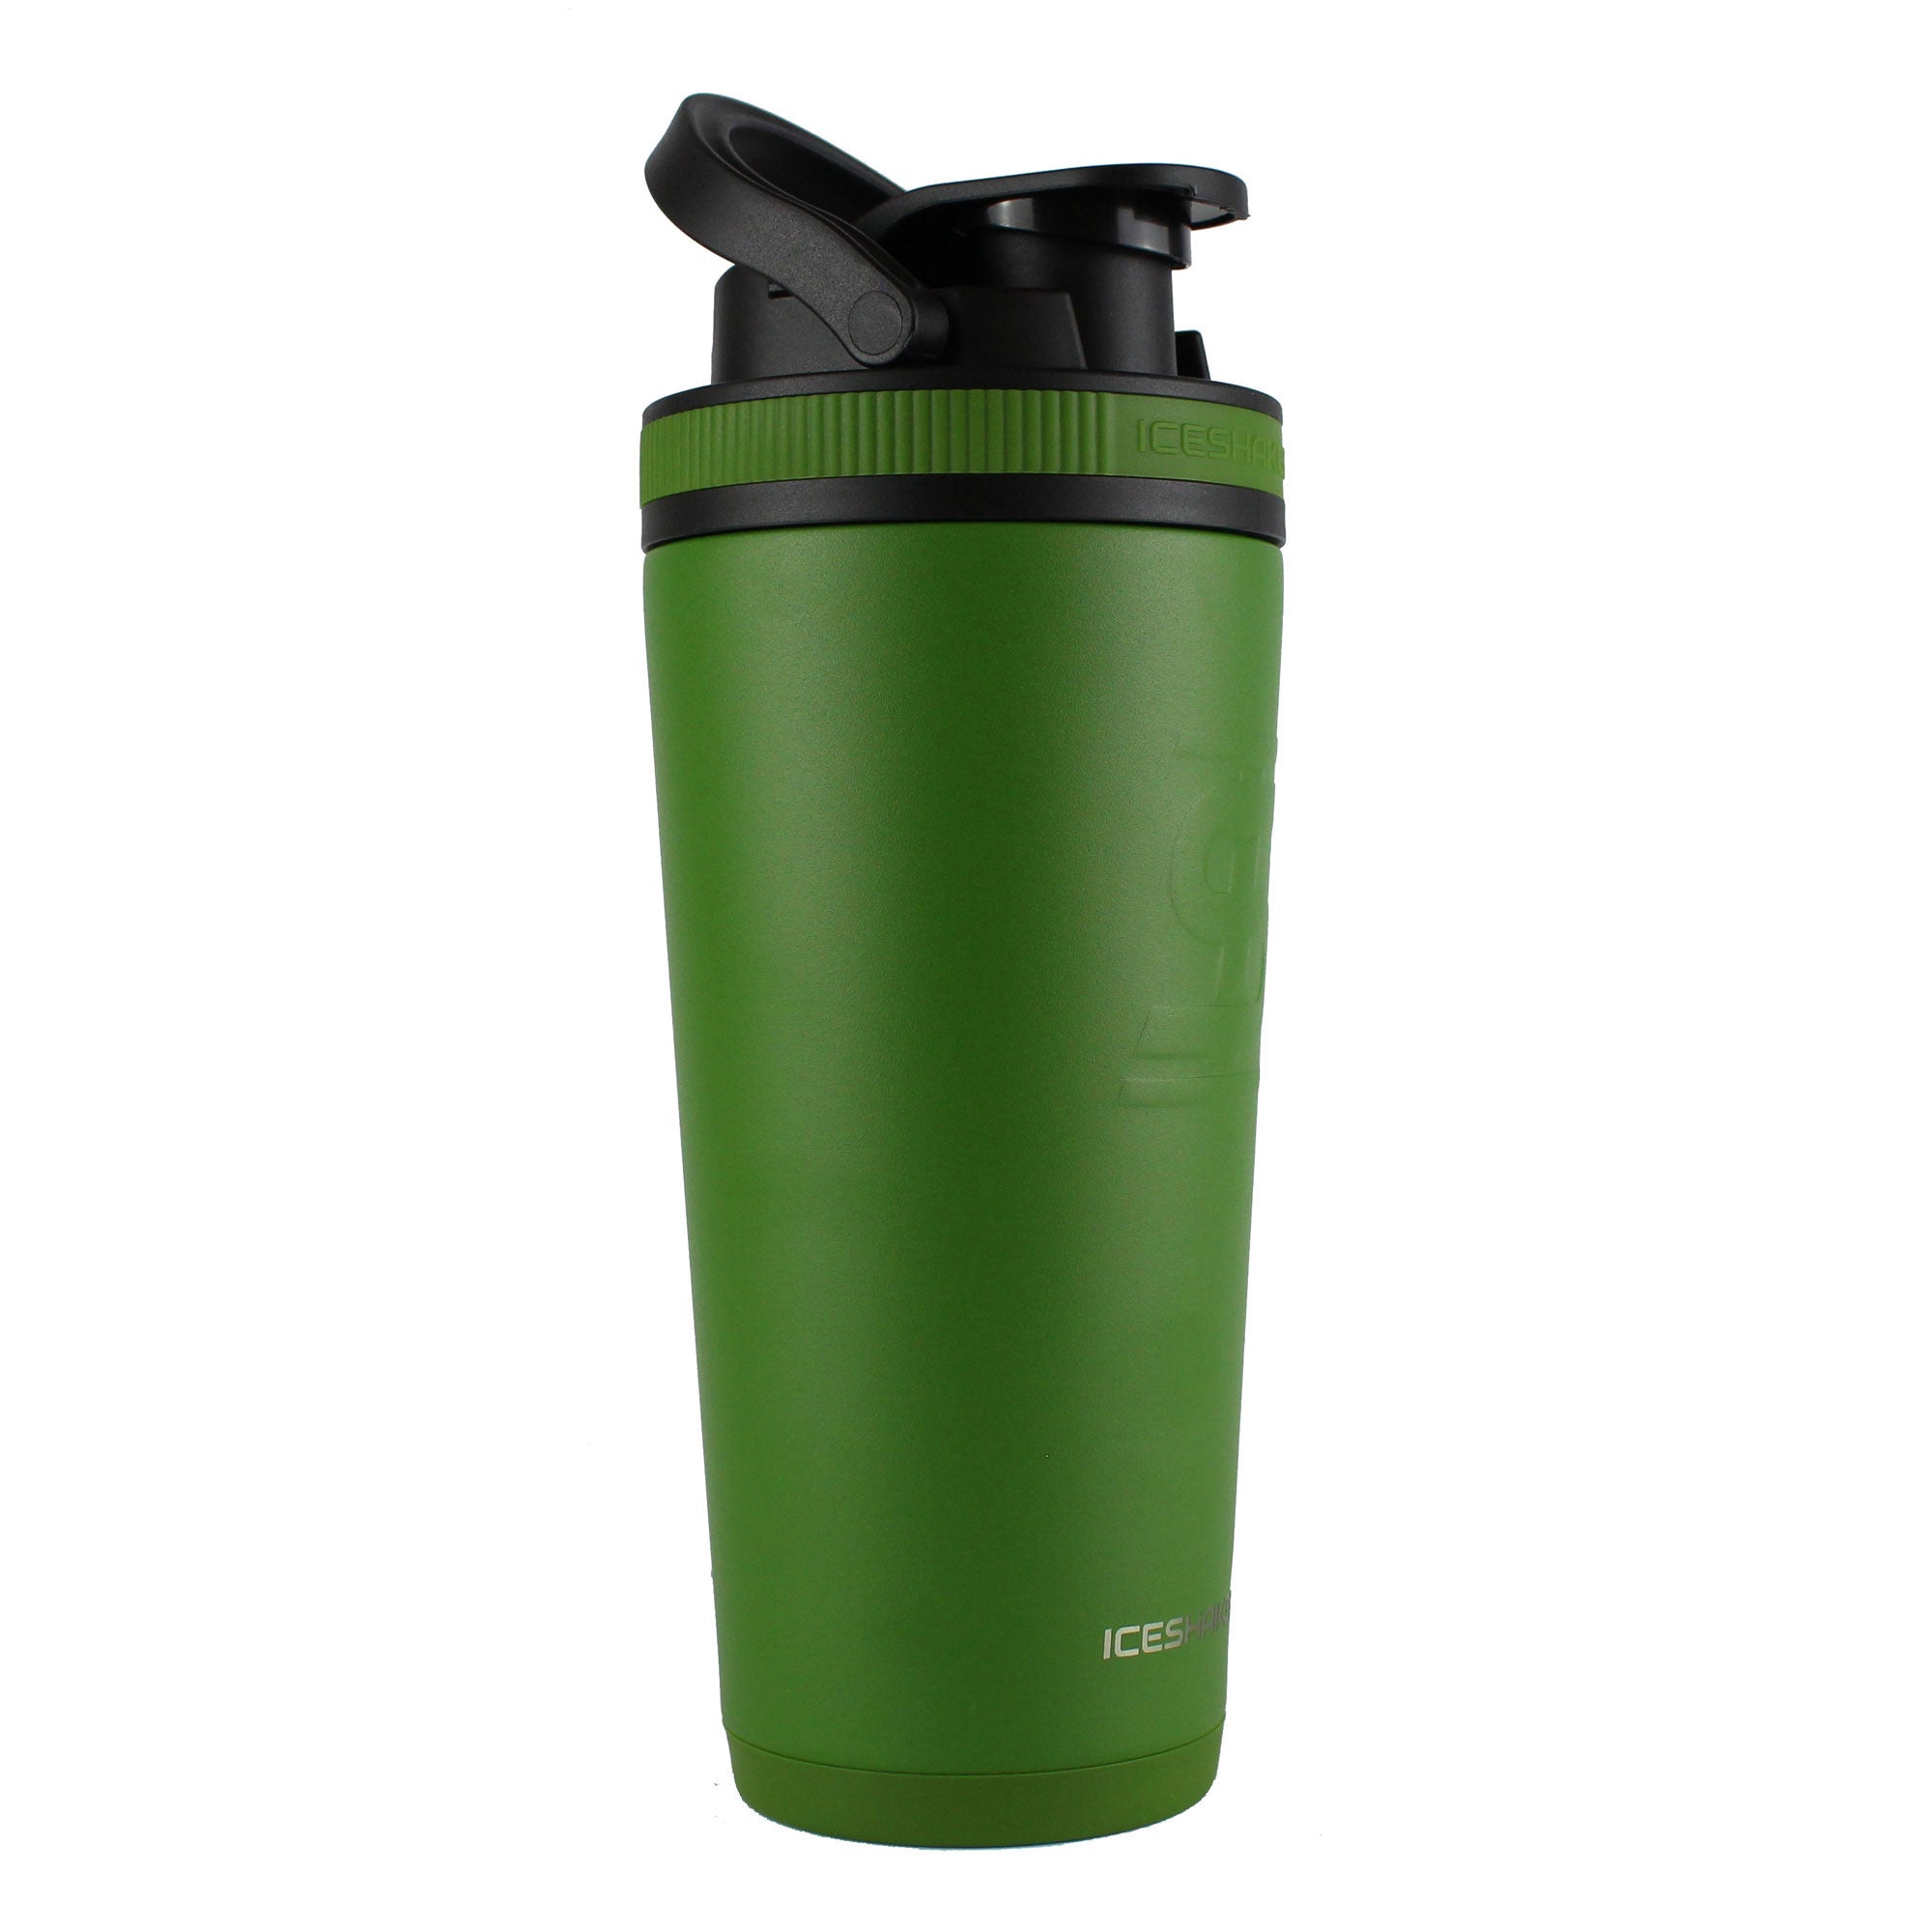 Officially Licensed Michigan State 26oz Ice Shaker - Green